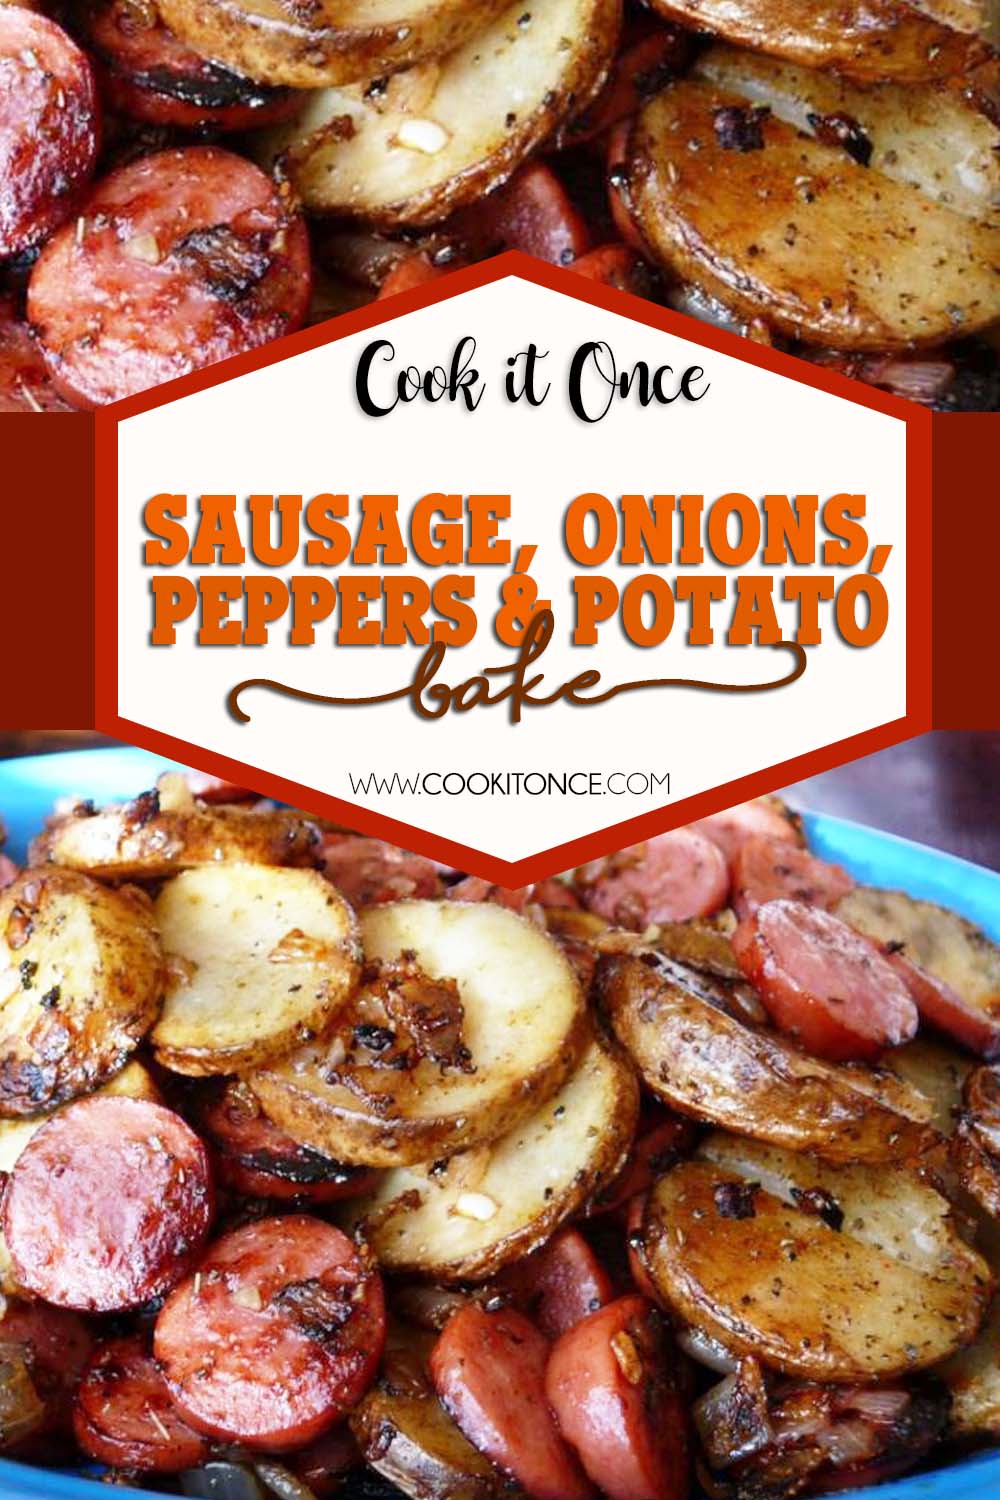 Sausage, Onions, Peppers and Potato Recipe